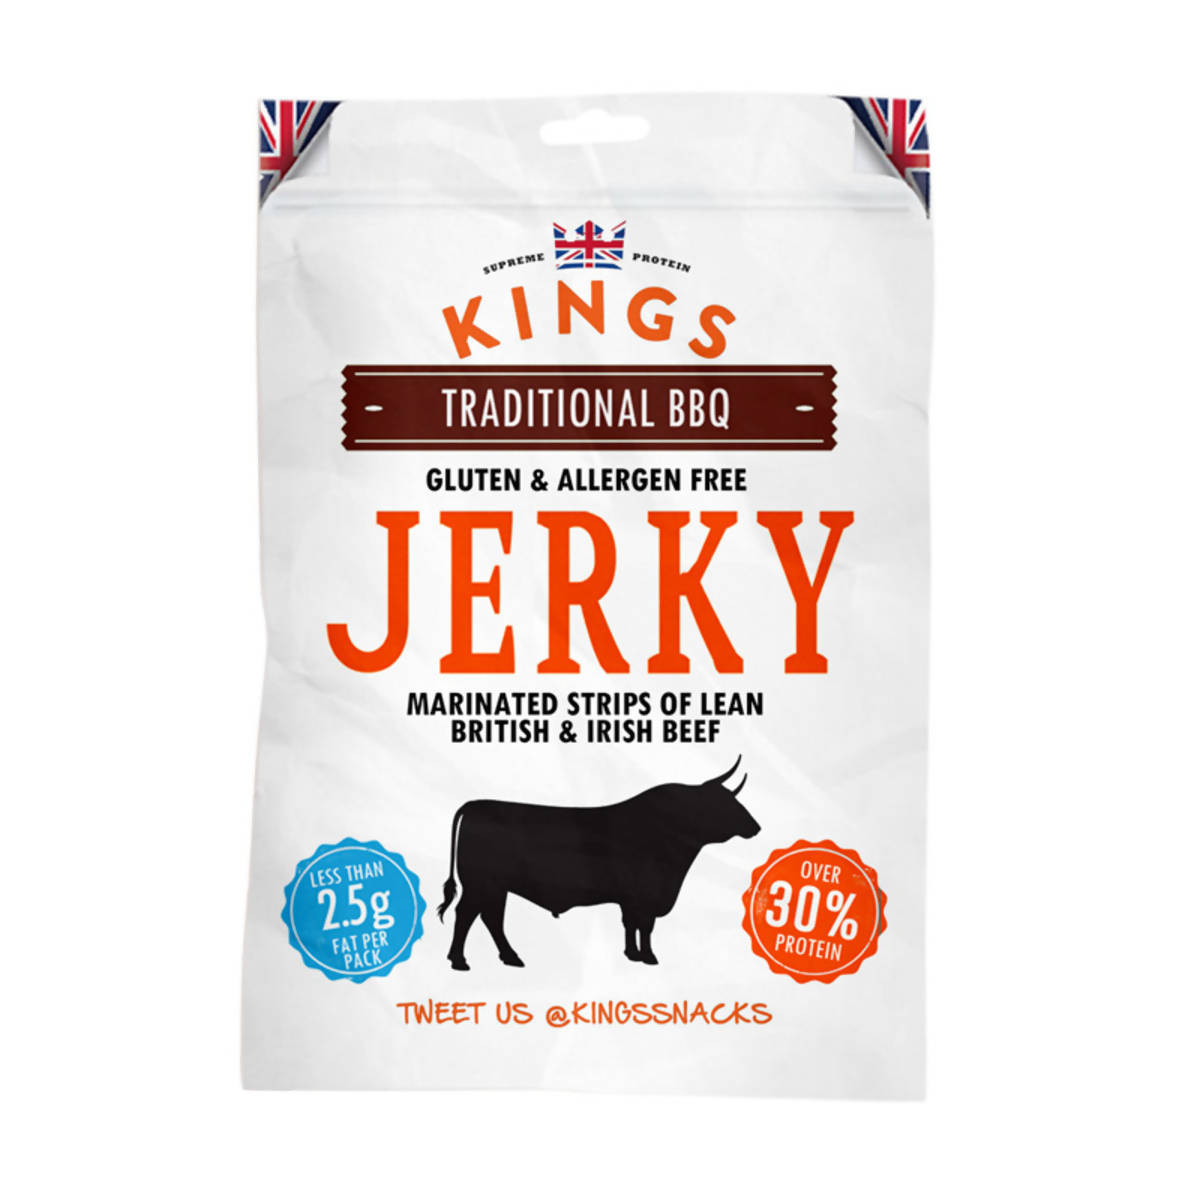 Kings Beef Jerky - Traditional BBQ Flavour, 16 x 35g Vitamins Costco UK   